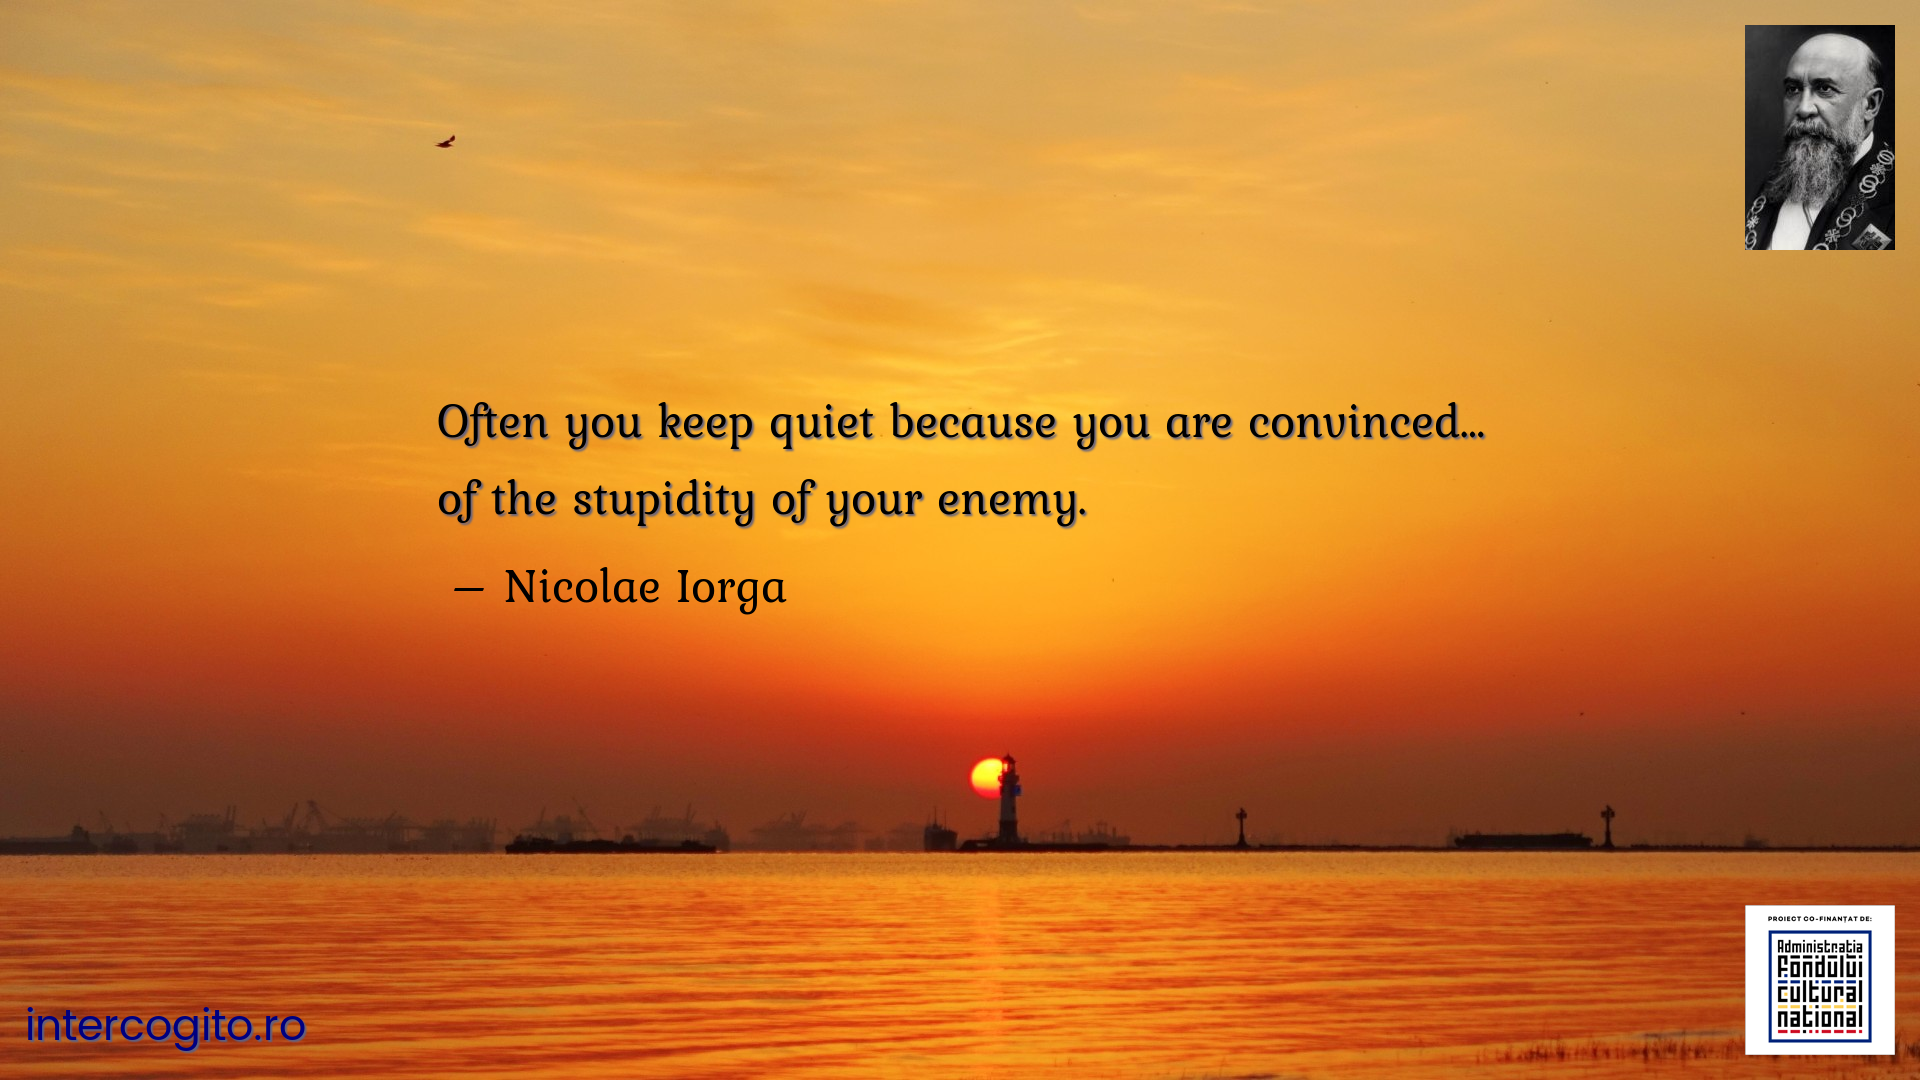 Often you keep quiet because you are convinced… of the stupidity of your enemy.